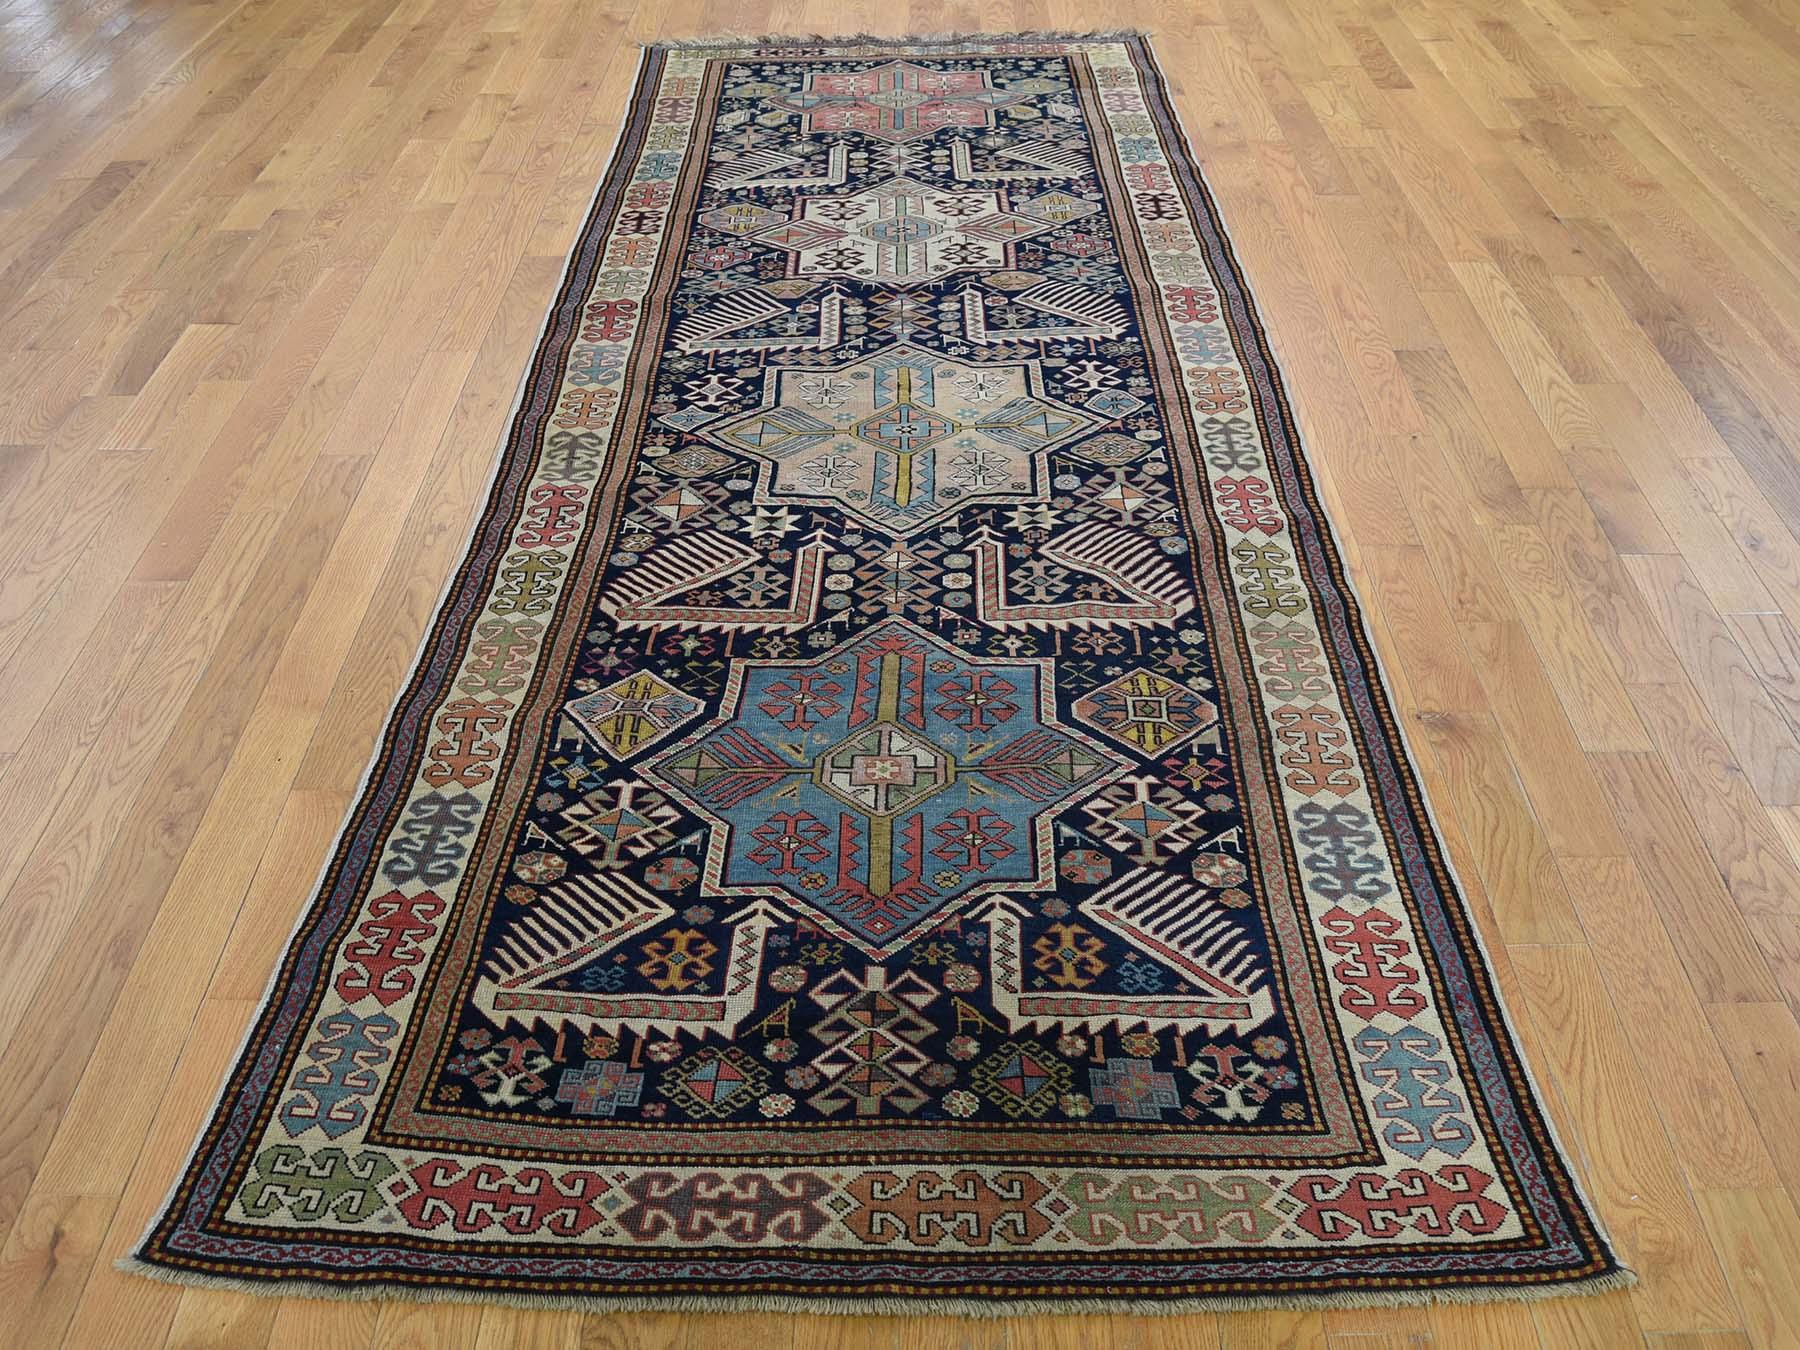 This is a genuine hand knotted oriental rug. It is not hand tufted or machine made rug. Our entire inventory is made of either hand knotted or handwoven rugs.

Bring life to your home with this lovely hand knotted Blue Akstafa Design, is an original